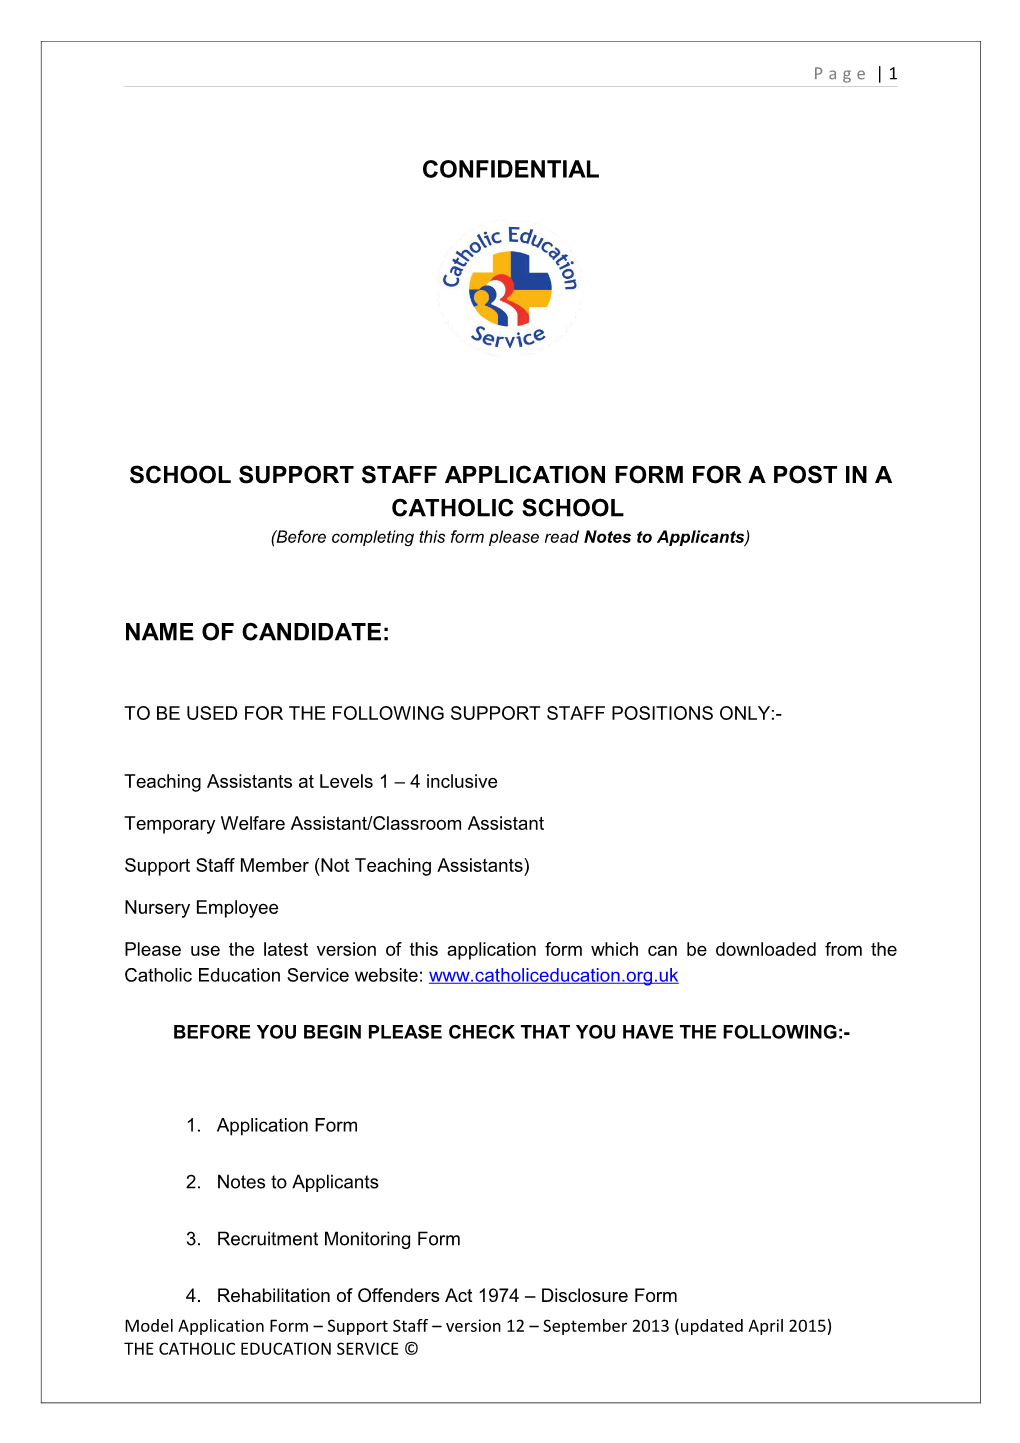 School Support Staff Application Form for a Post in a Catholic School s1